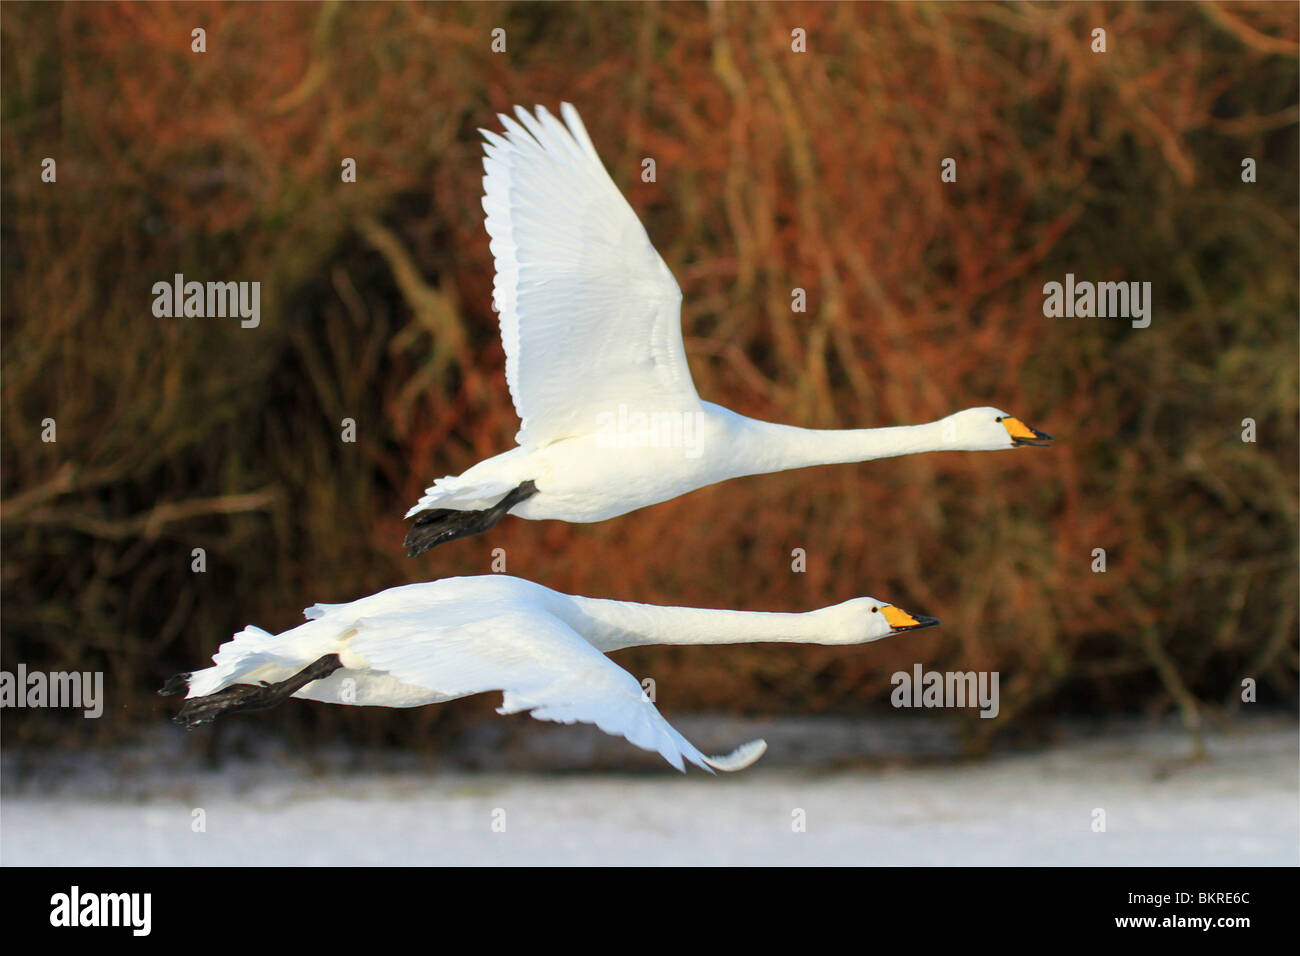 two whooper swans in flight at the Wildfowl and Wetland Trust Reserve at Caerlaverock in South West Scotland, UK. Stock Photo